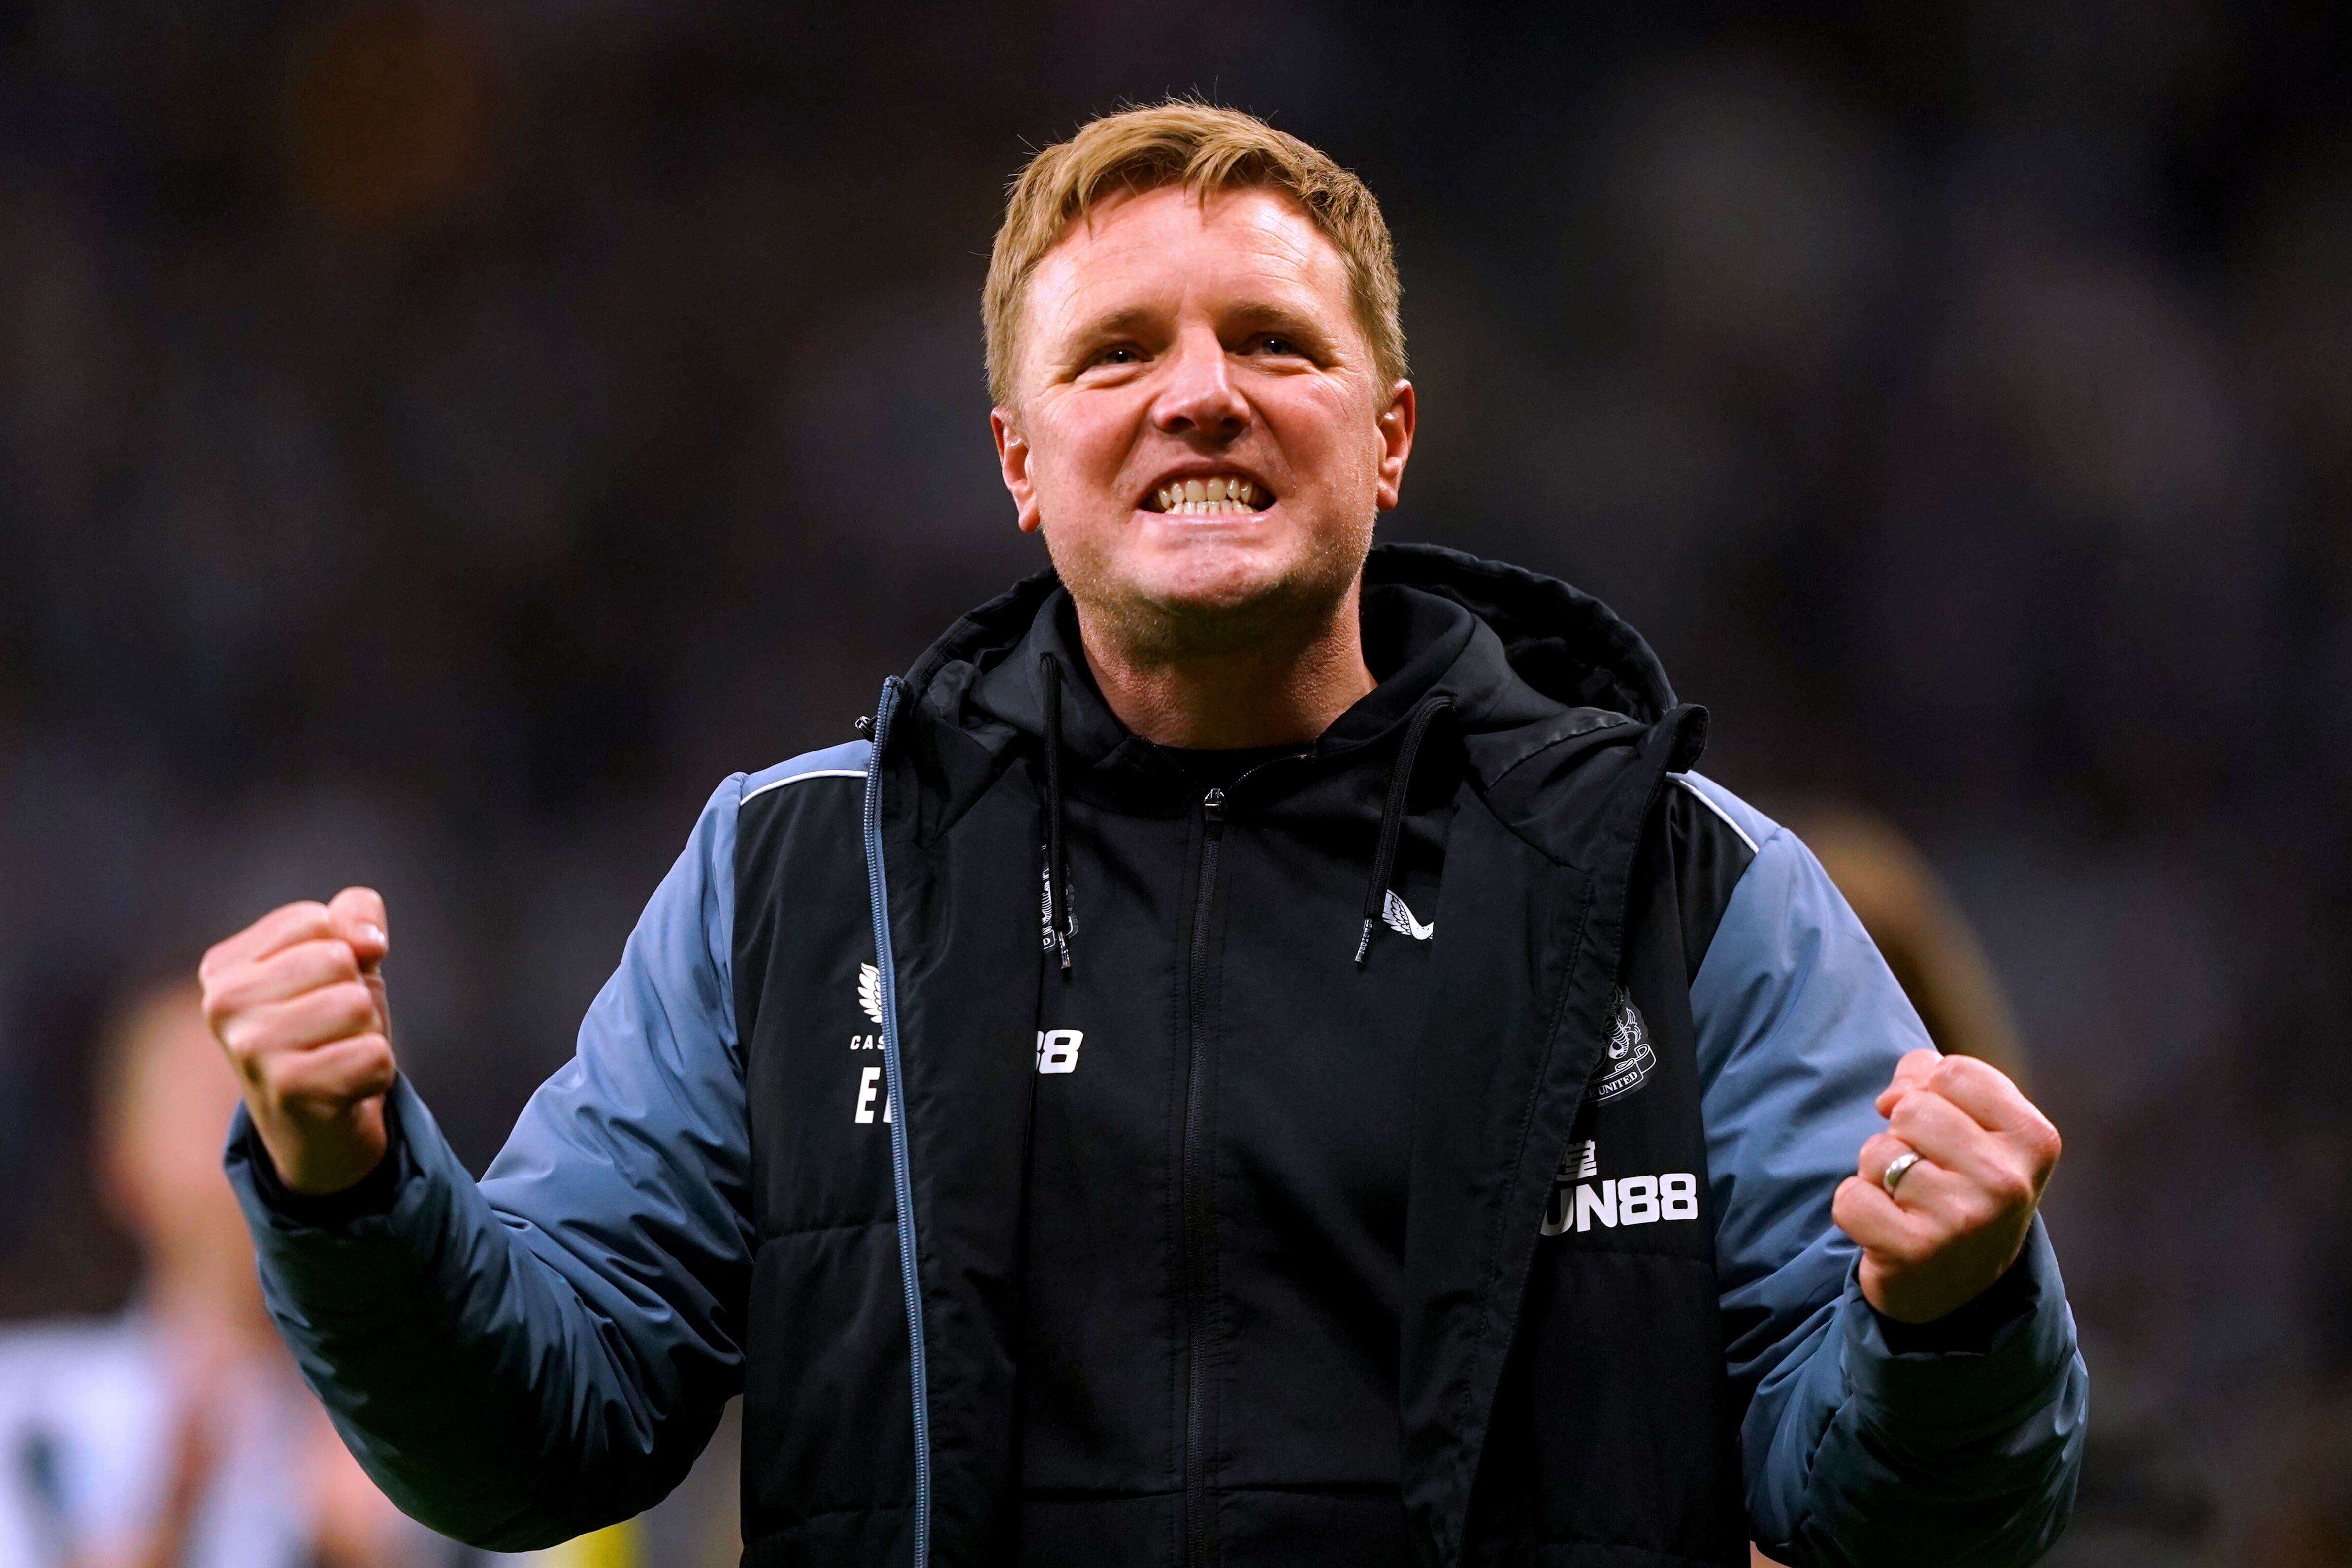 Newcastle head coach Eddie Howe has admitted the club has “massively over-achieved” this season (Owen Humphreys/PA)